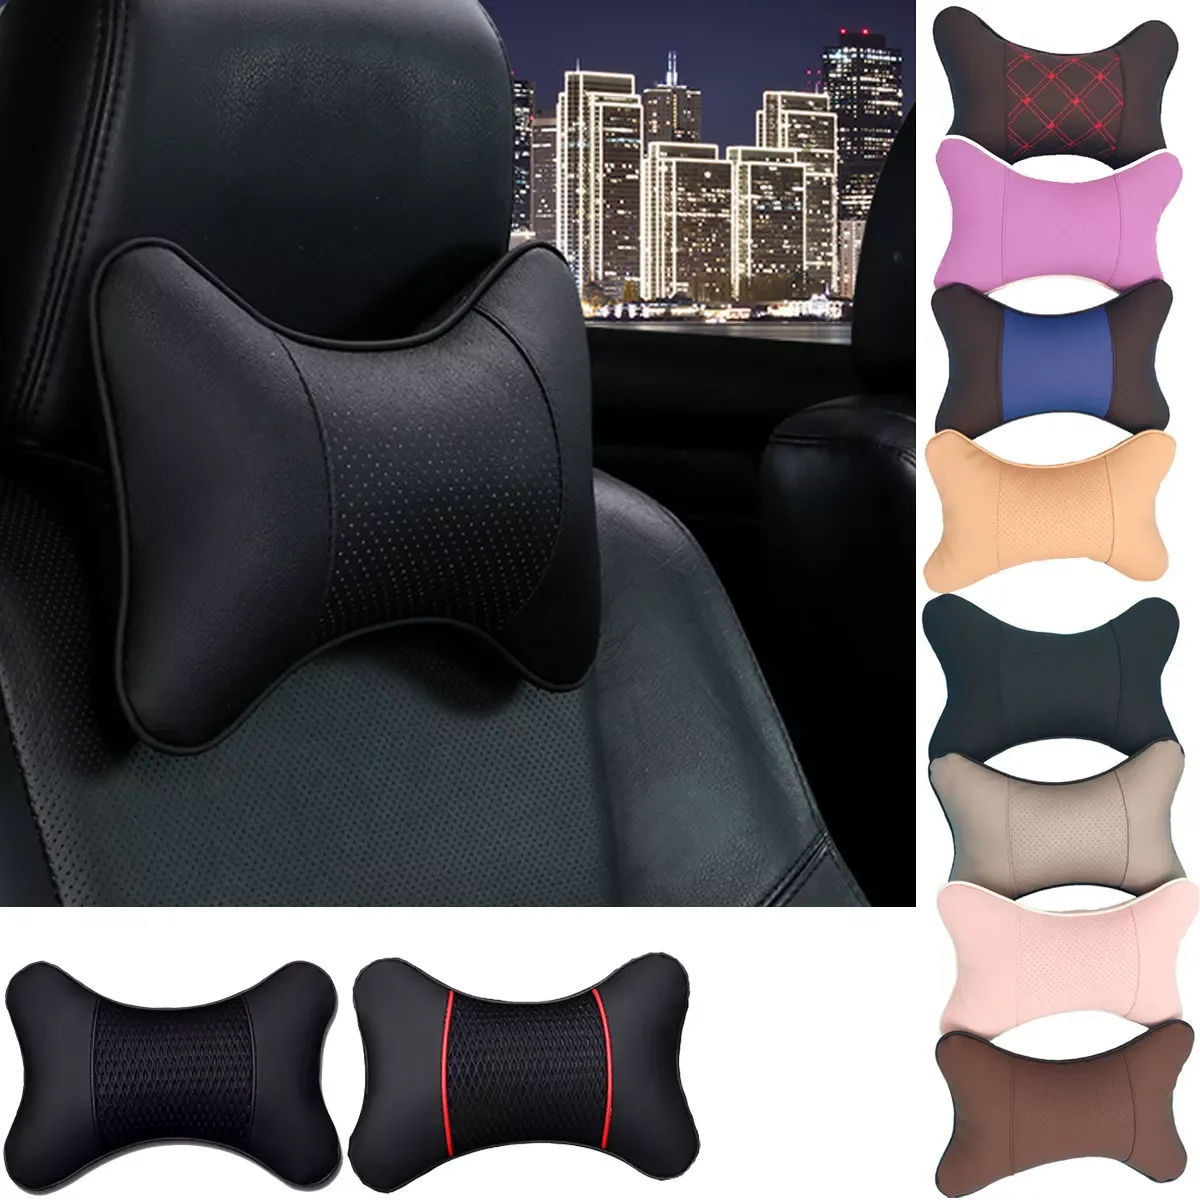 

Neck Pillows Both Side Pu Leather 1pcs Pack Headrest For Head Pain Relief Filled Fiber Universal Car Pillow